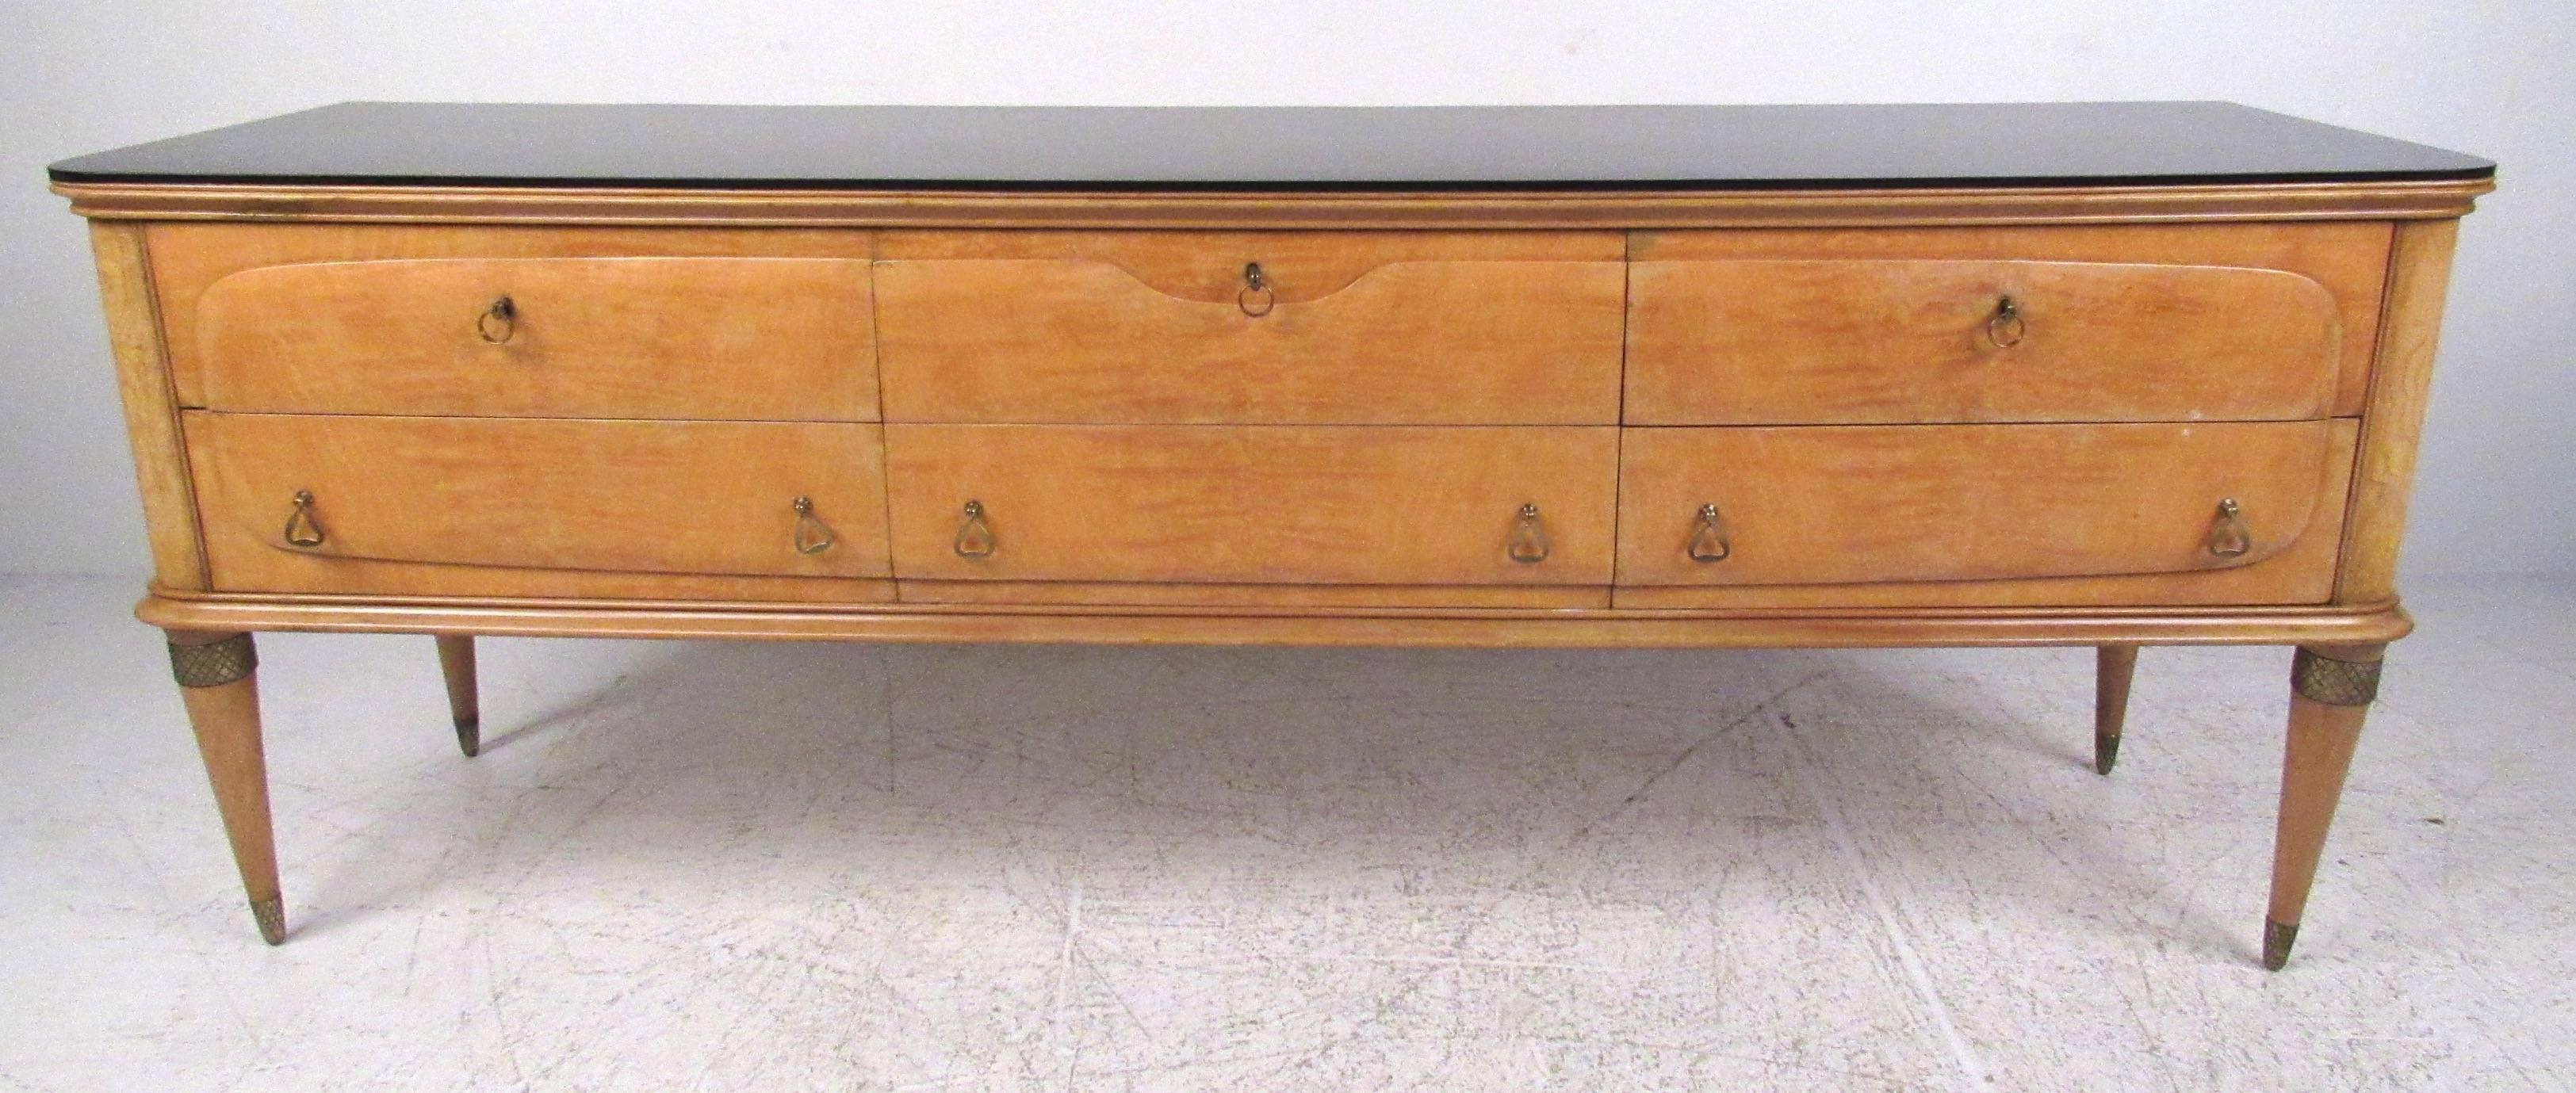 This Mid-Century Modern Gio Ponti style dresser features elegant Italian design details and six spacious drawers offering ample storage in any setting. The removable laminate style top makes a durable tabletop for dressing or storage while stylish